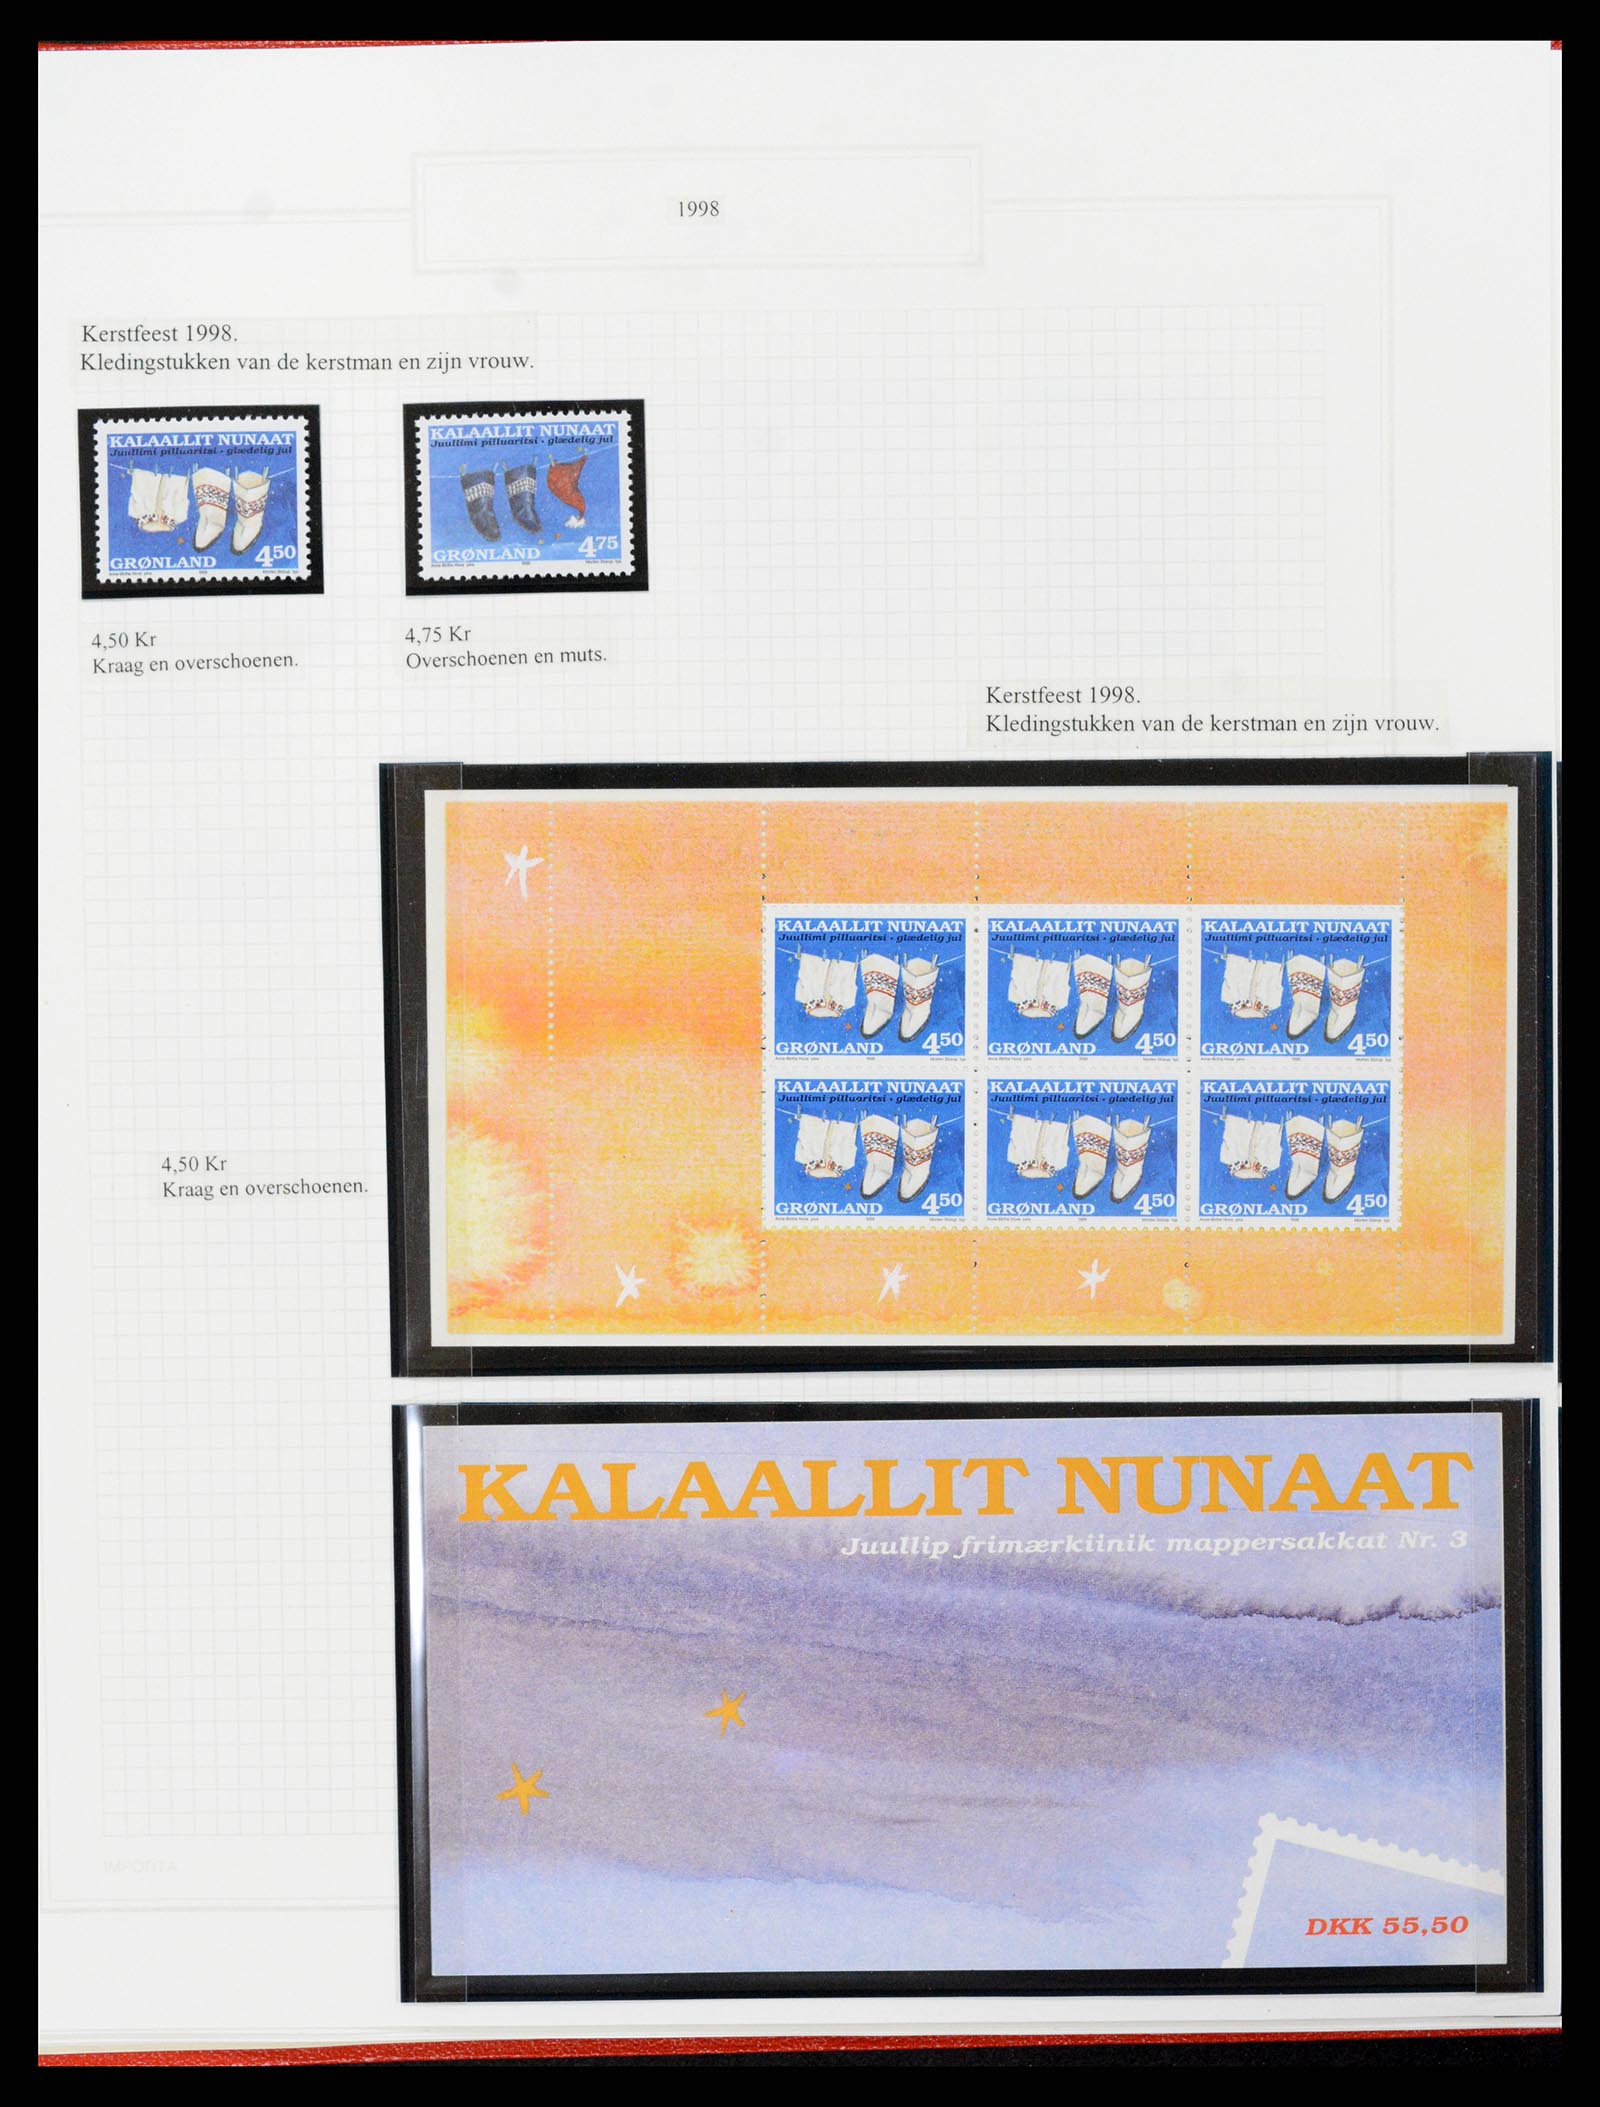 37302 100 - Stamp collection 37302 Greenland and Faroe Islands 1905-2001.